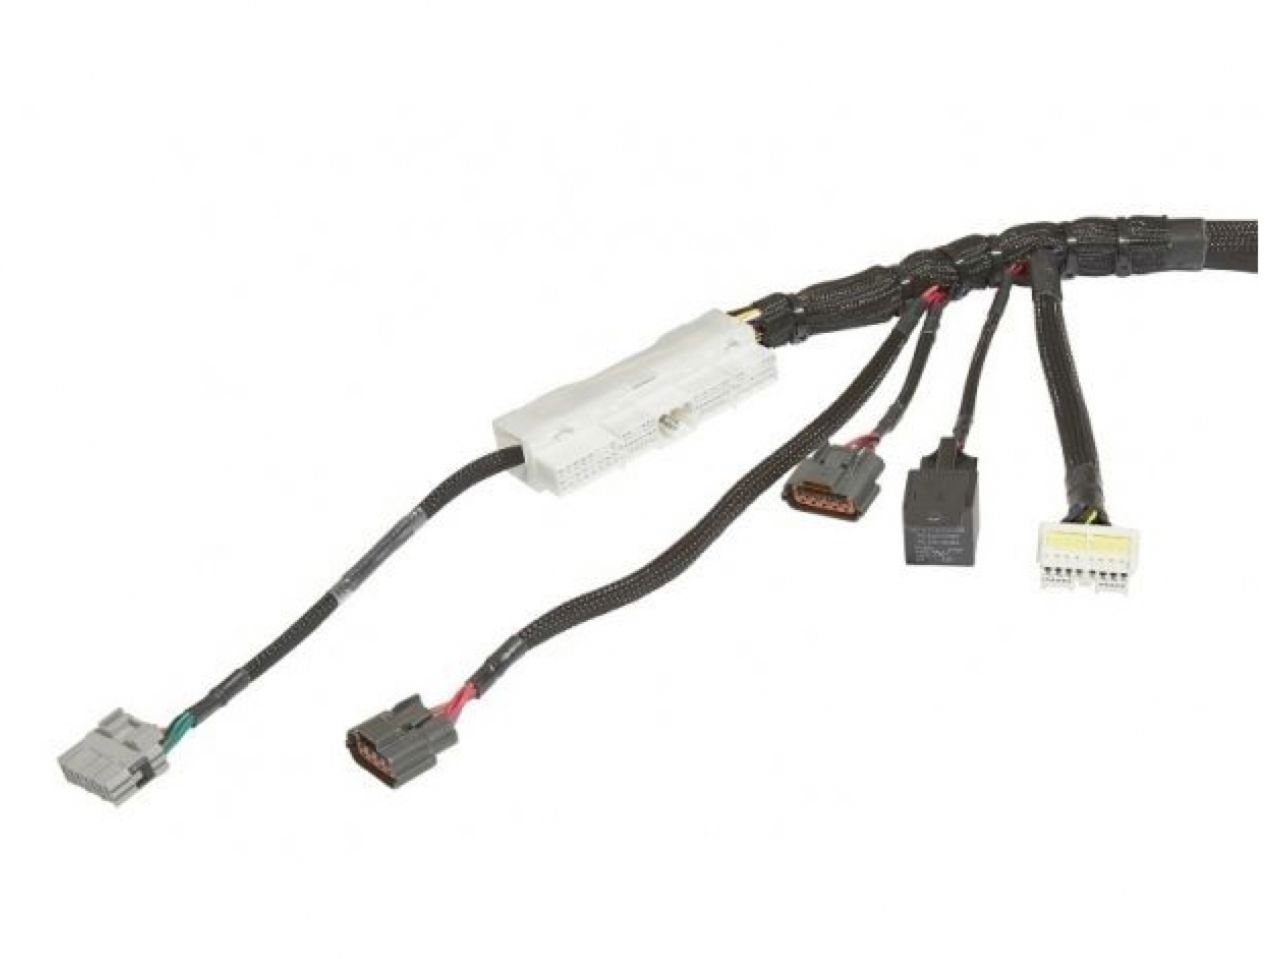 Wiring Specialties S13 SR20DET Wiring Harness for Datsun&#039;s - PRO SERIES